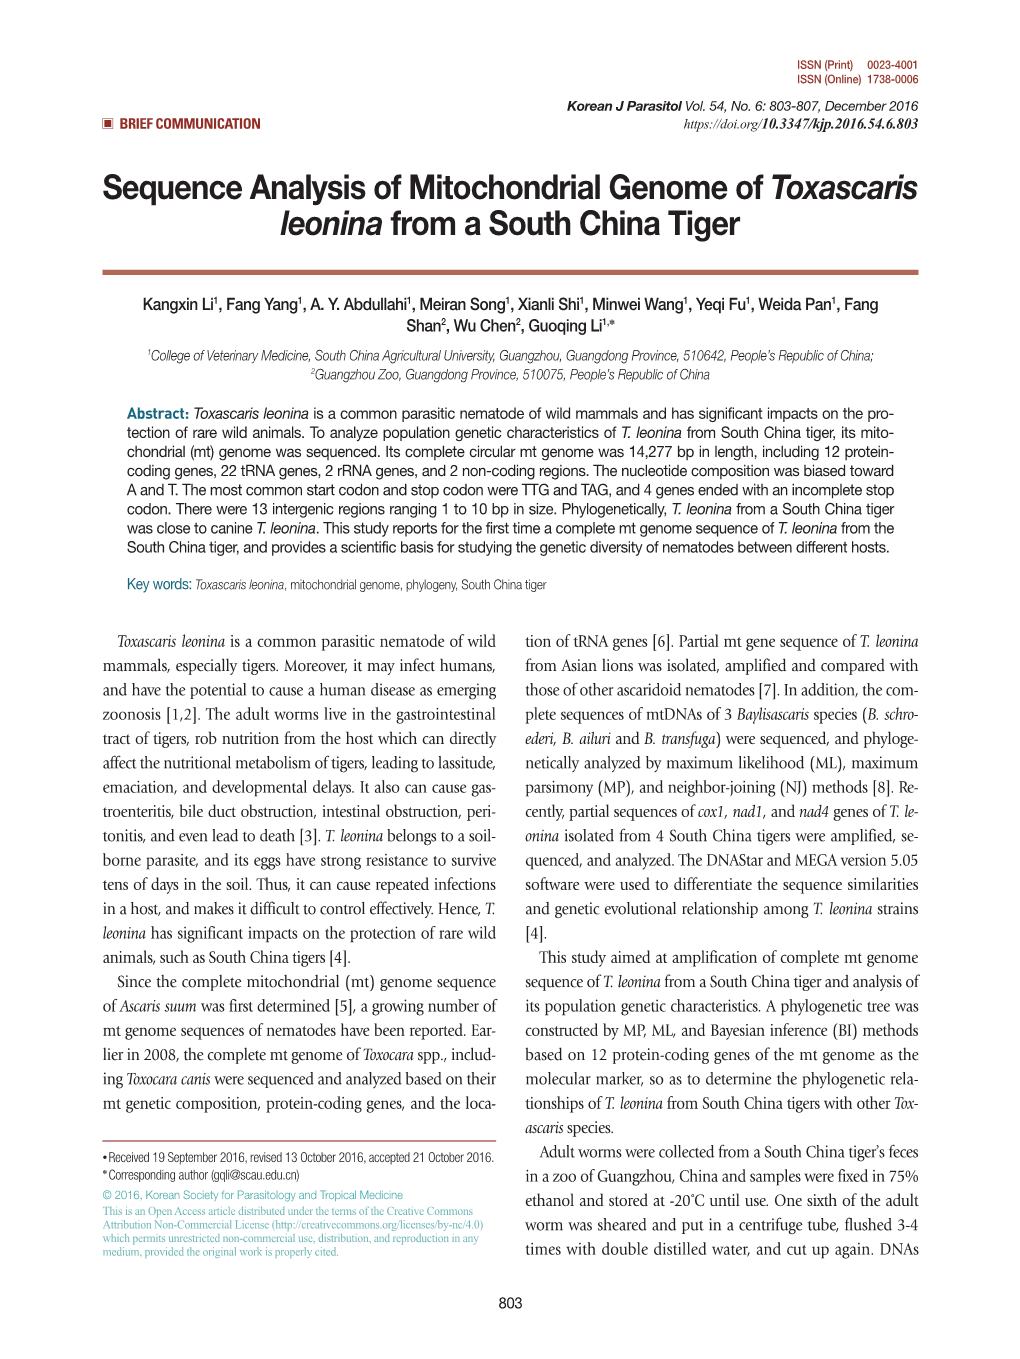 Sequence Analysis of Mitochondrial Genome of Toxascaris Leonina from a South China Tiger